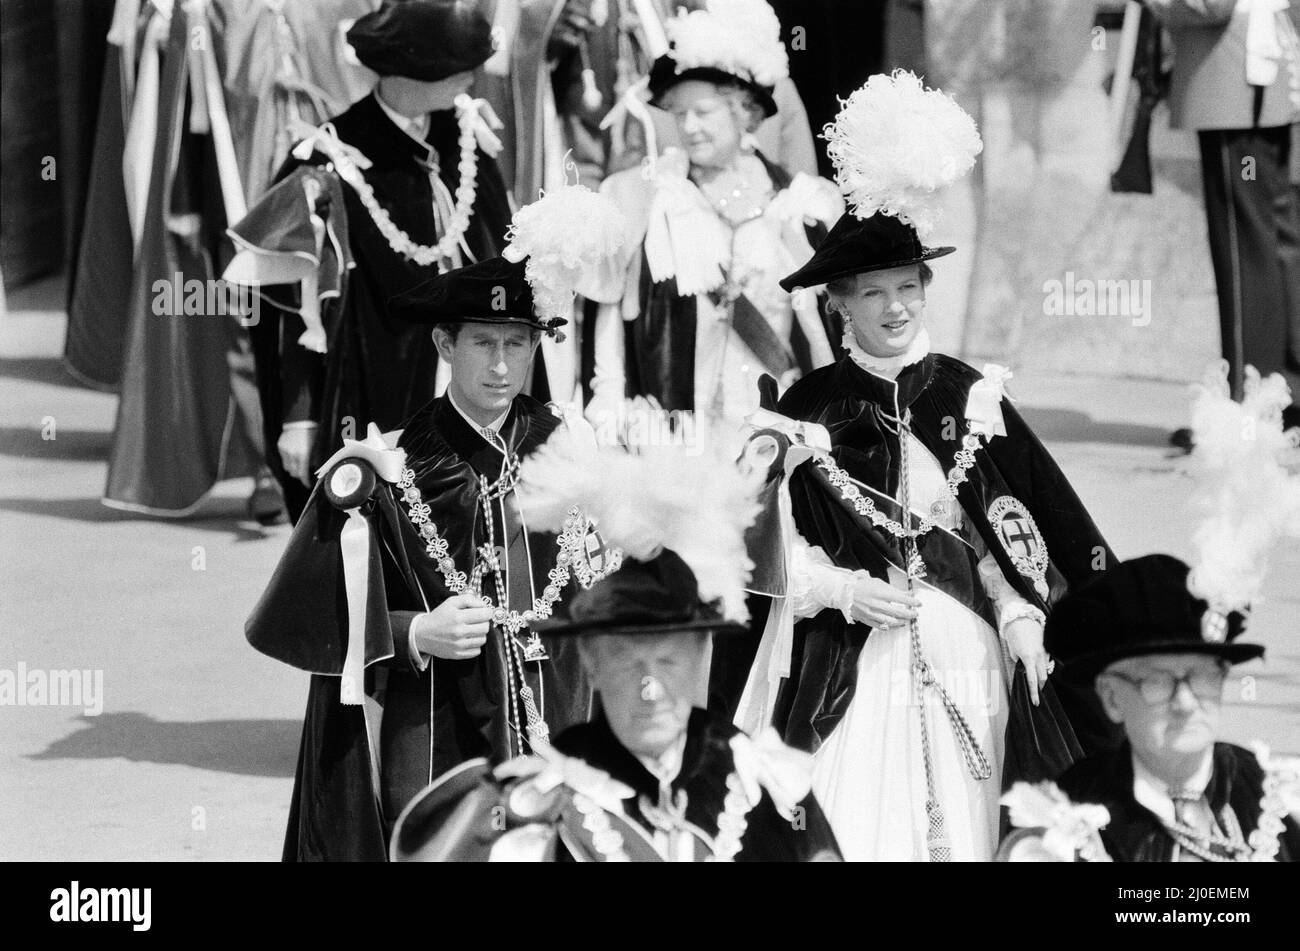 His Royal Highness The Price of Wales escorts Her majesty Margrethe II Queen of Denmark at the Order of the Garter service. 16th June 1980. Stock Photo